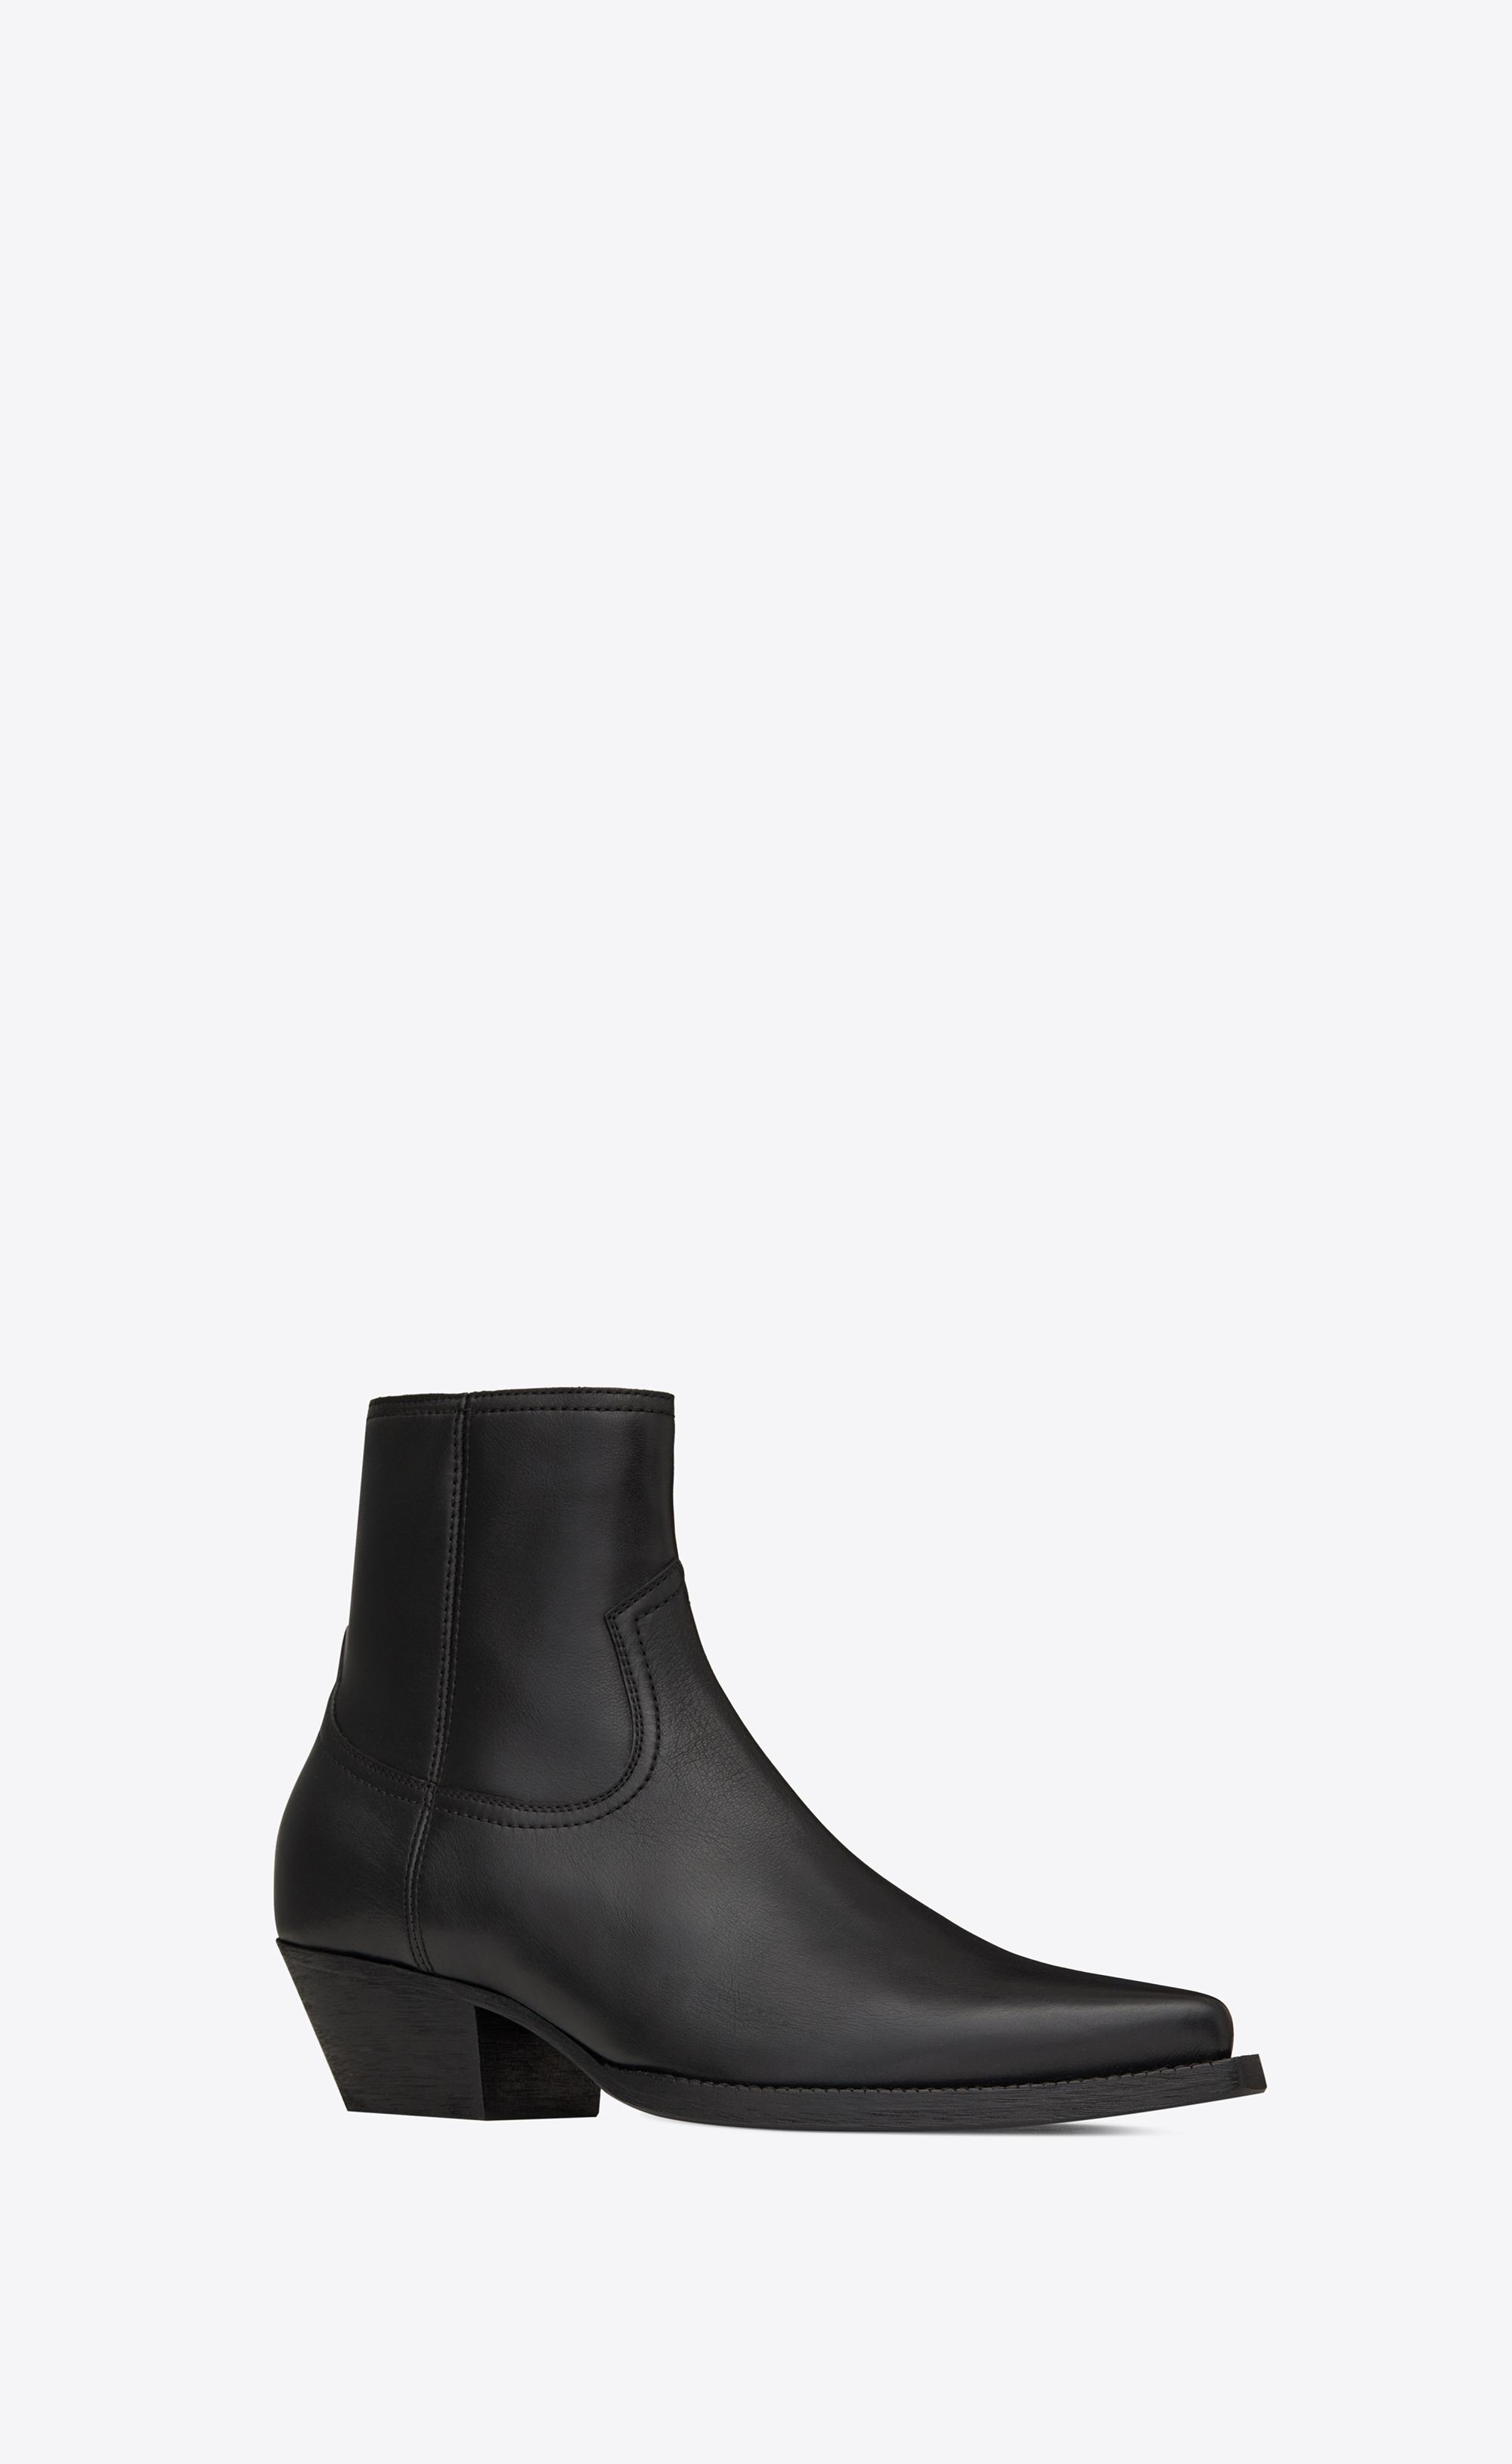 Saint Laurent Lukas Boots In Leather in Black for Men - Lyst